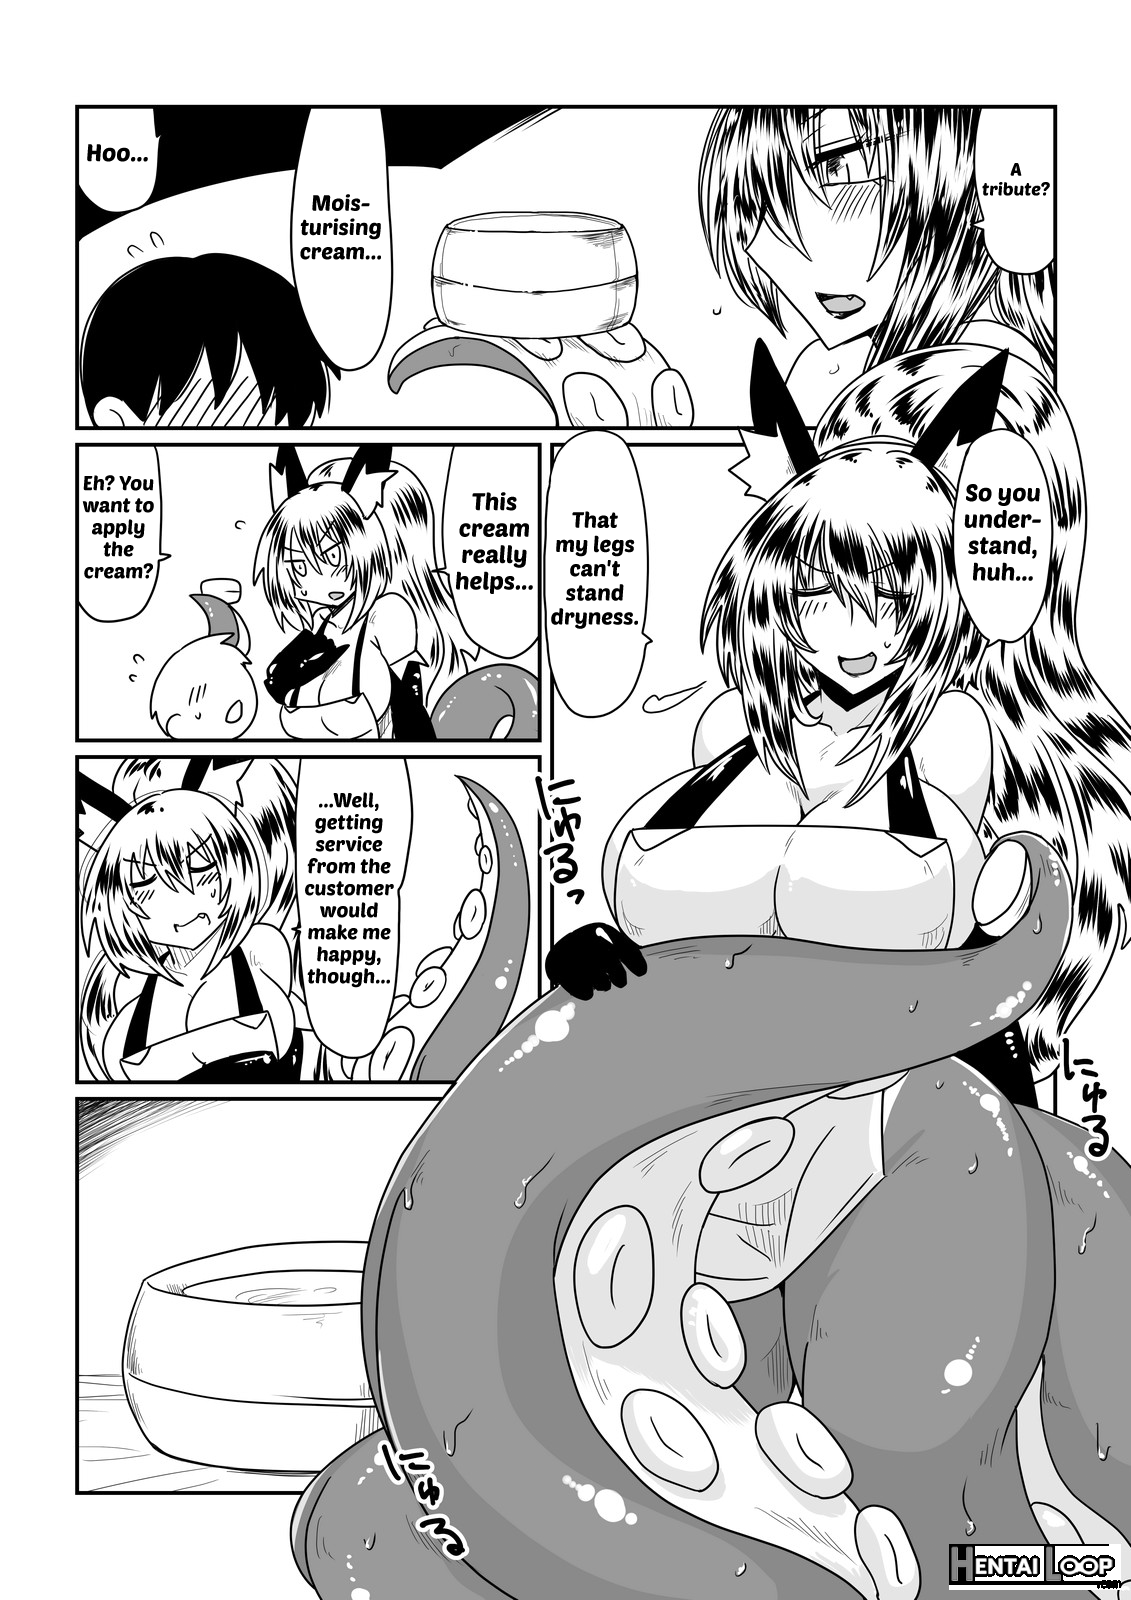 Interspecies Brothel ~miss Scylla's Chapter~ page 4